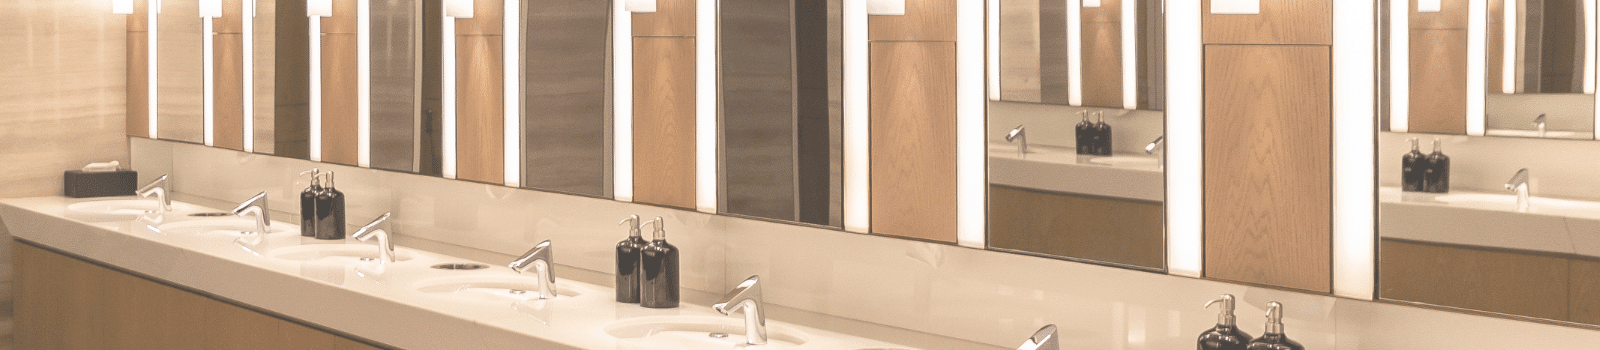 A Guide to Commercial Restroom Design Trends